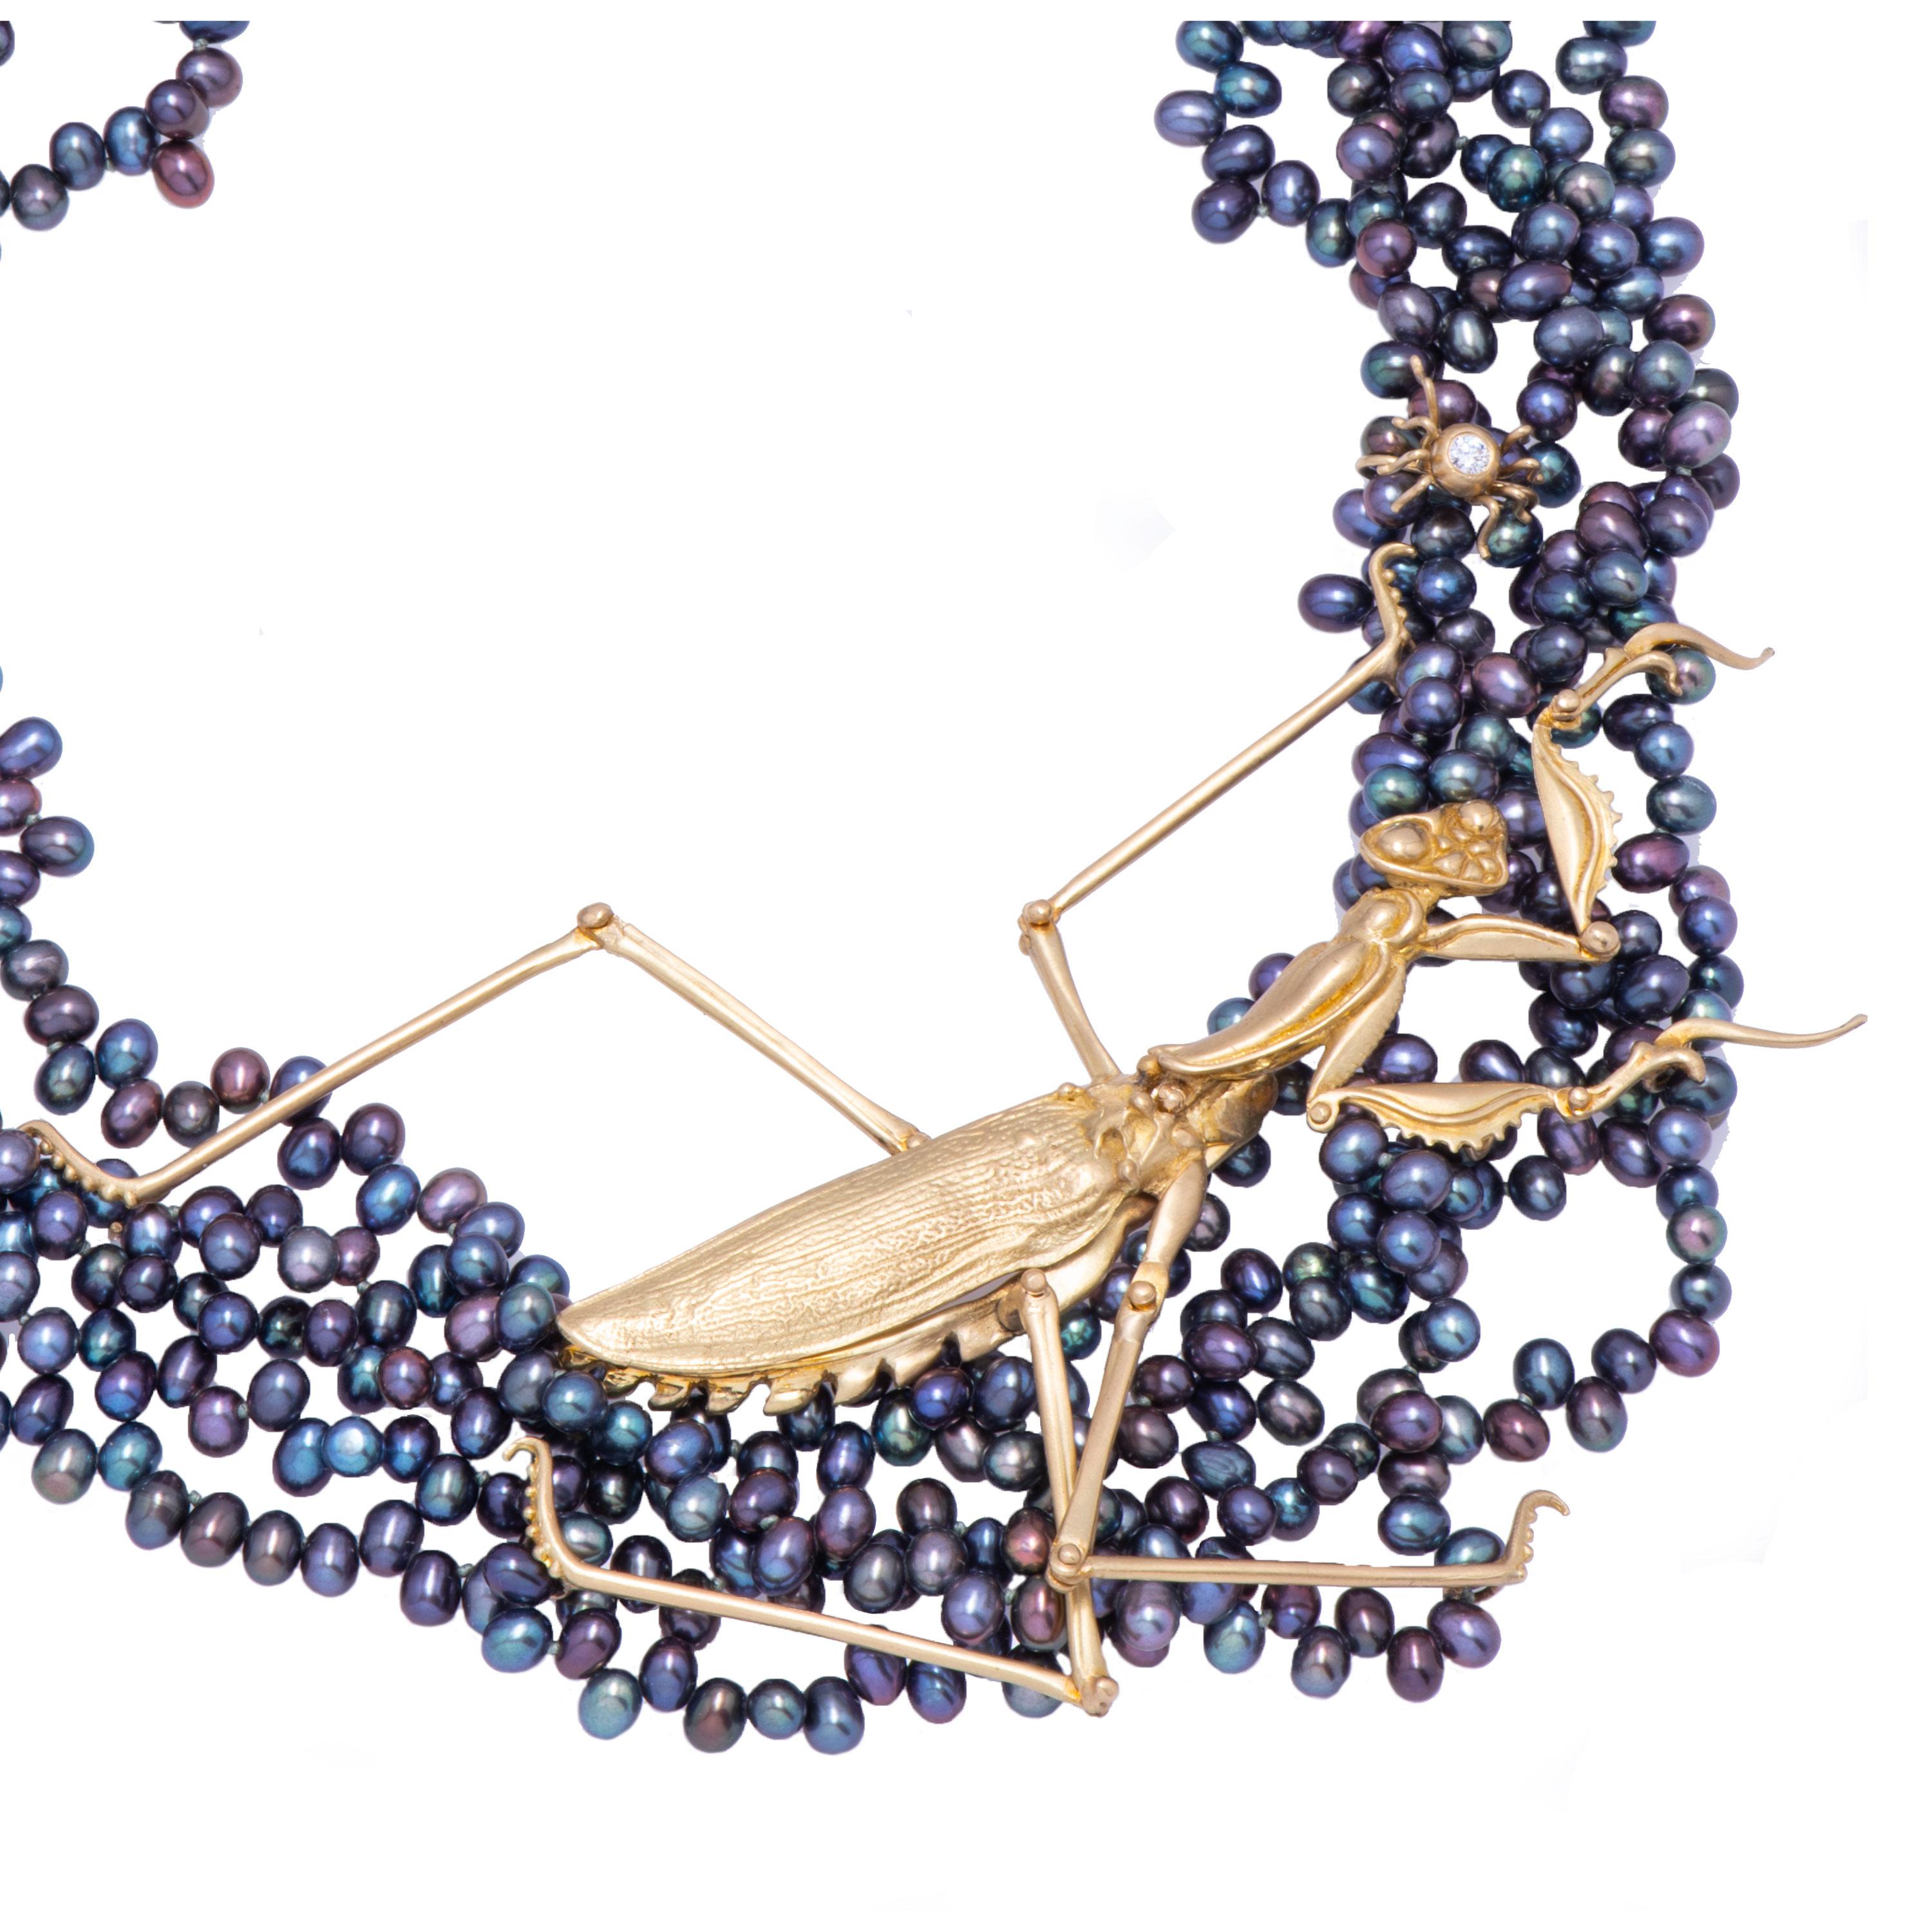 An 18 karat gold praying mantis tip toes across 5 strands of blue/purple Chinese freshwater pearls reaching delicately for an 18 karat gold spider set with a .15 carat diamond in this Pearl Necklace with Mantis. Fixed slightly to the right of